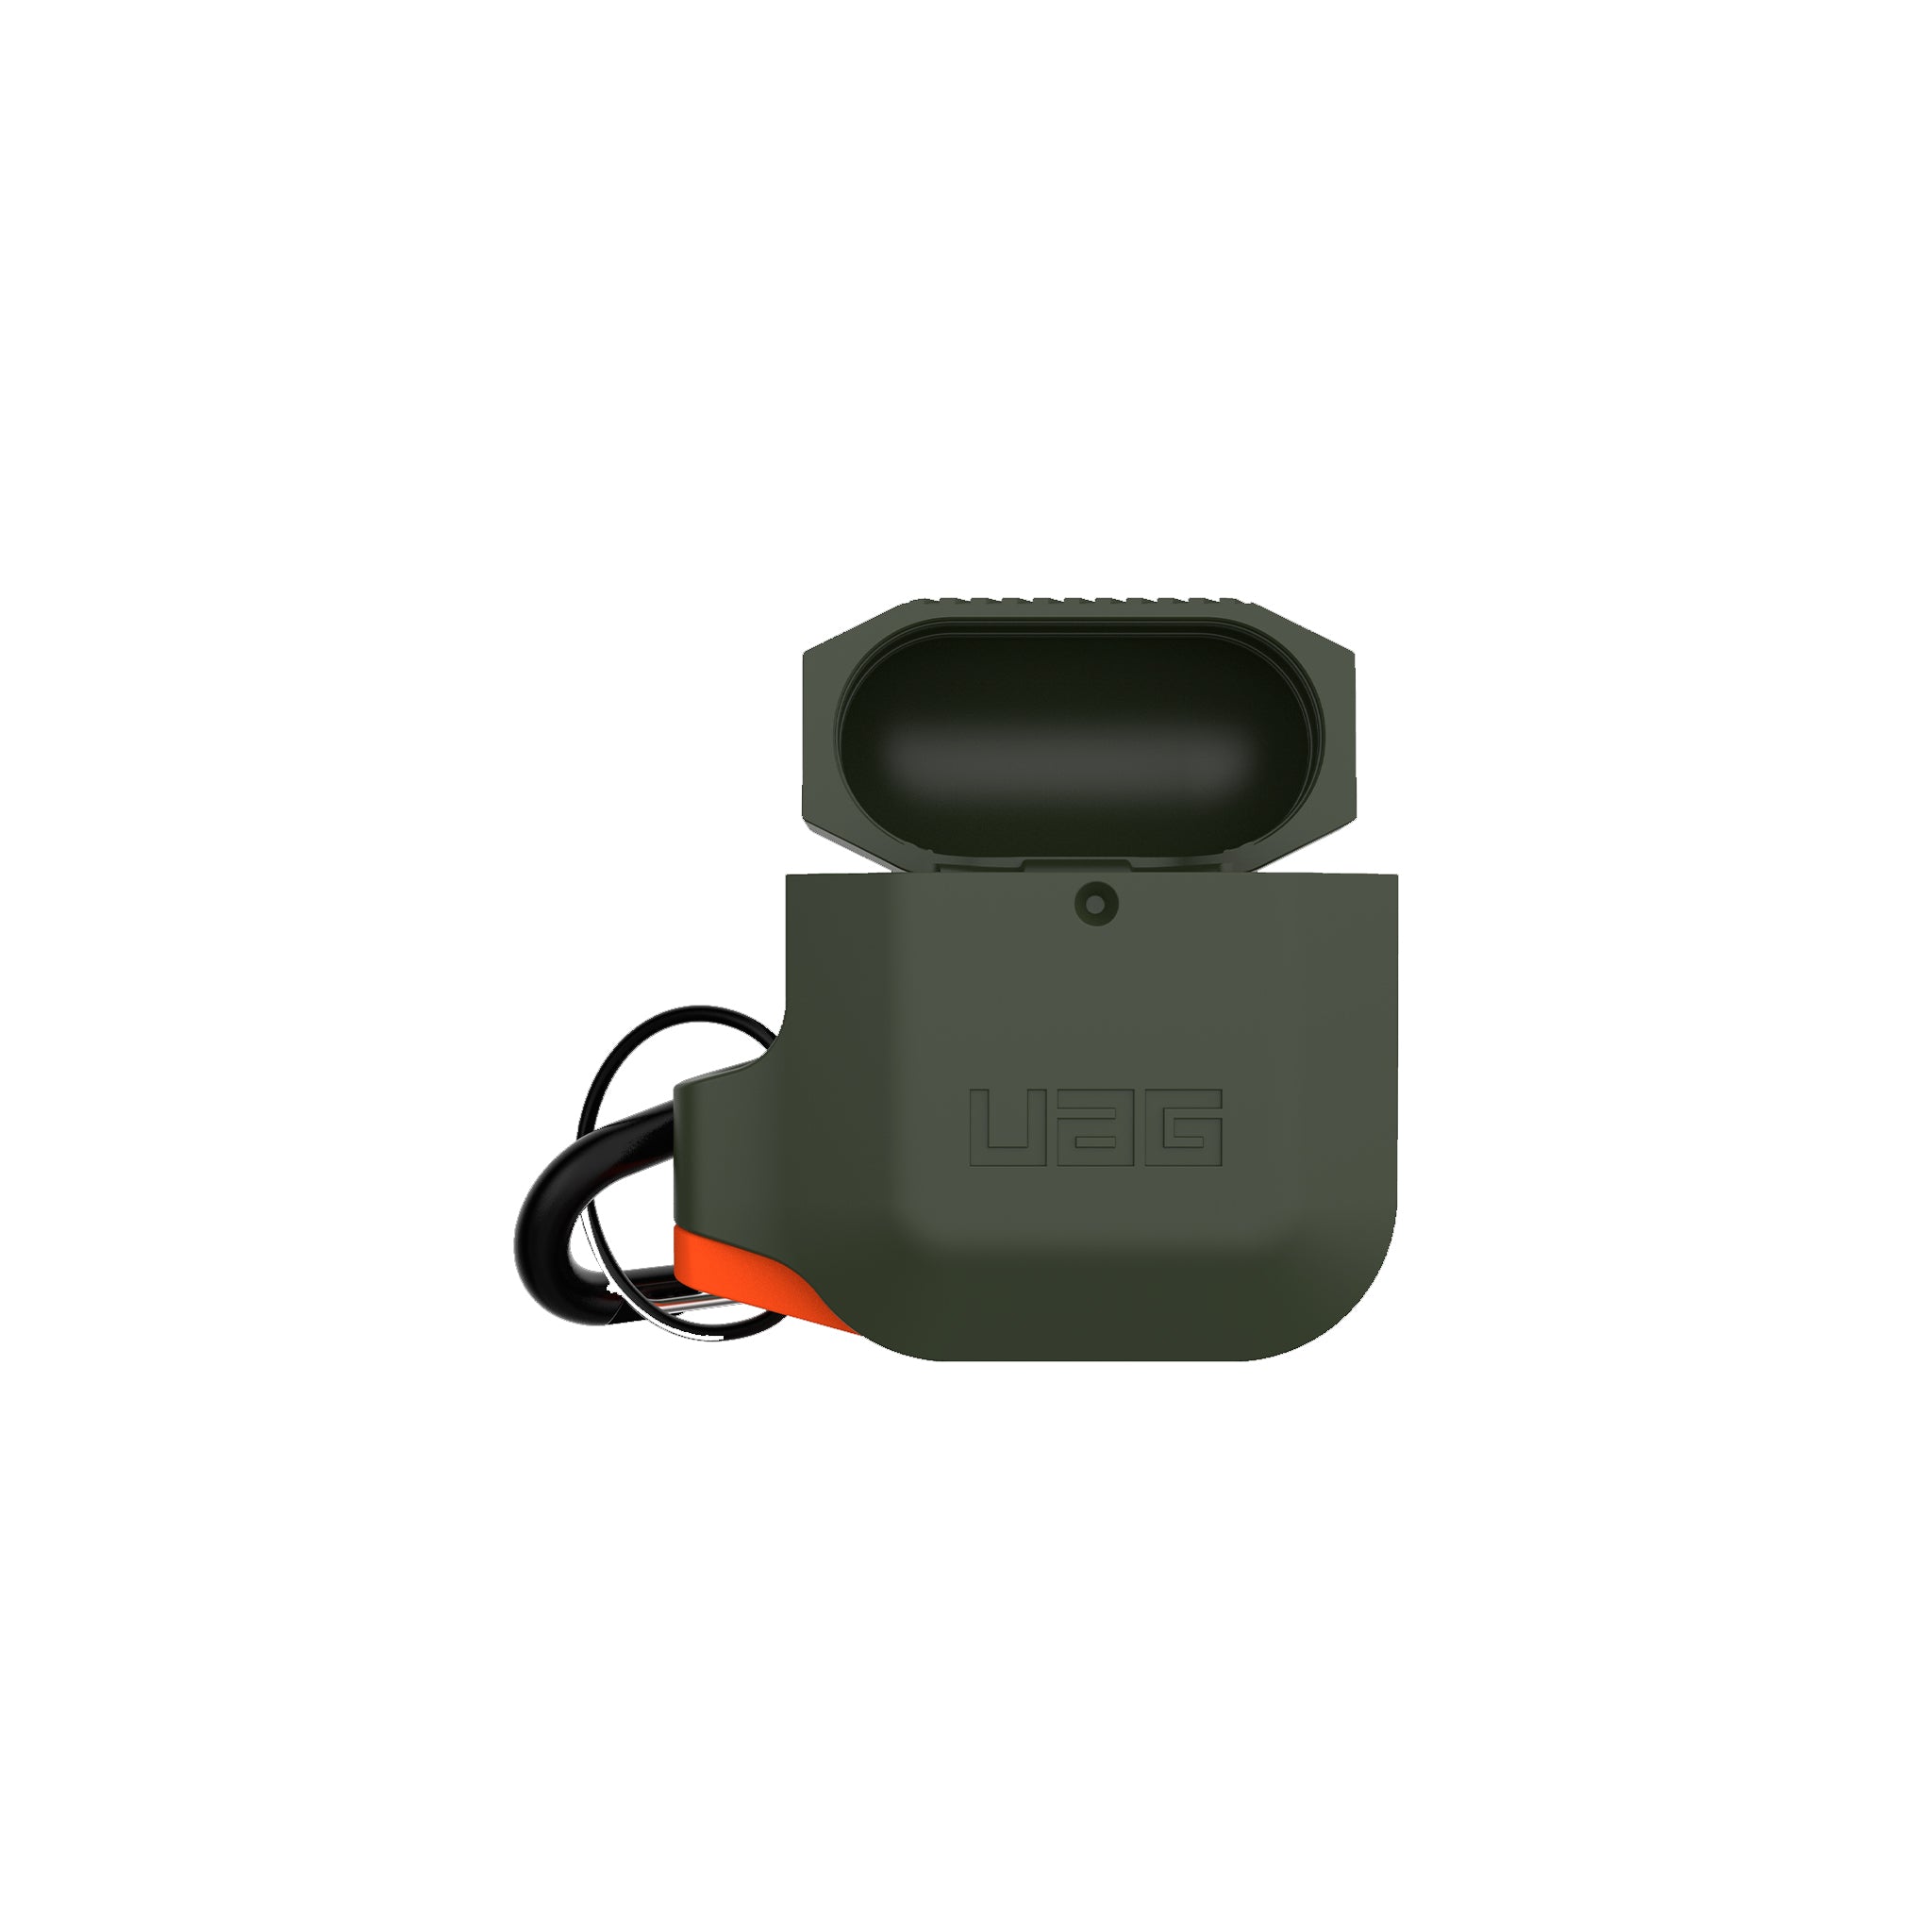 Urban Armor Gear (uag) - Silicone Case For Apple Airpods - Olive Drab And Orange